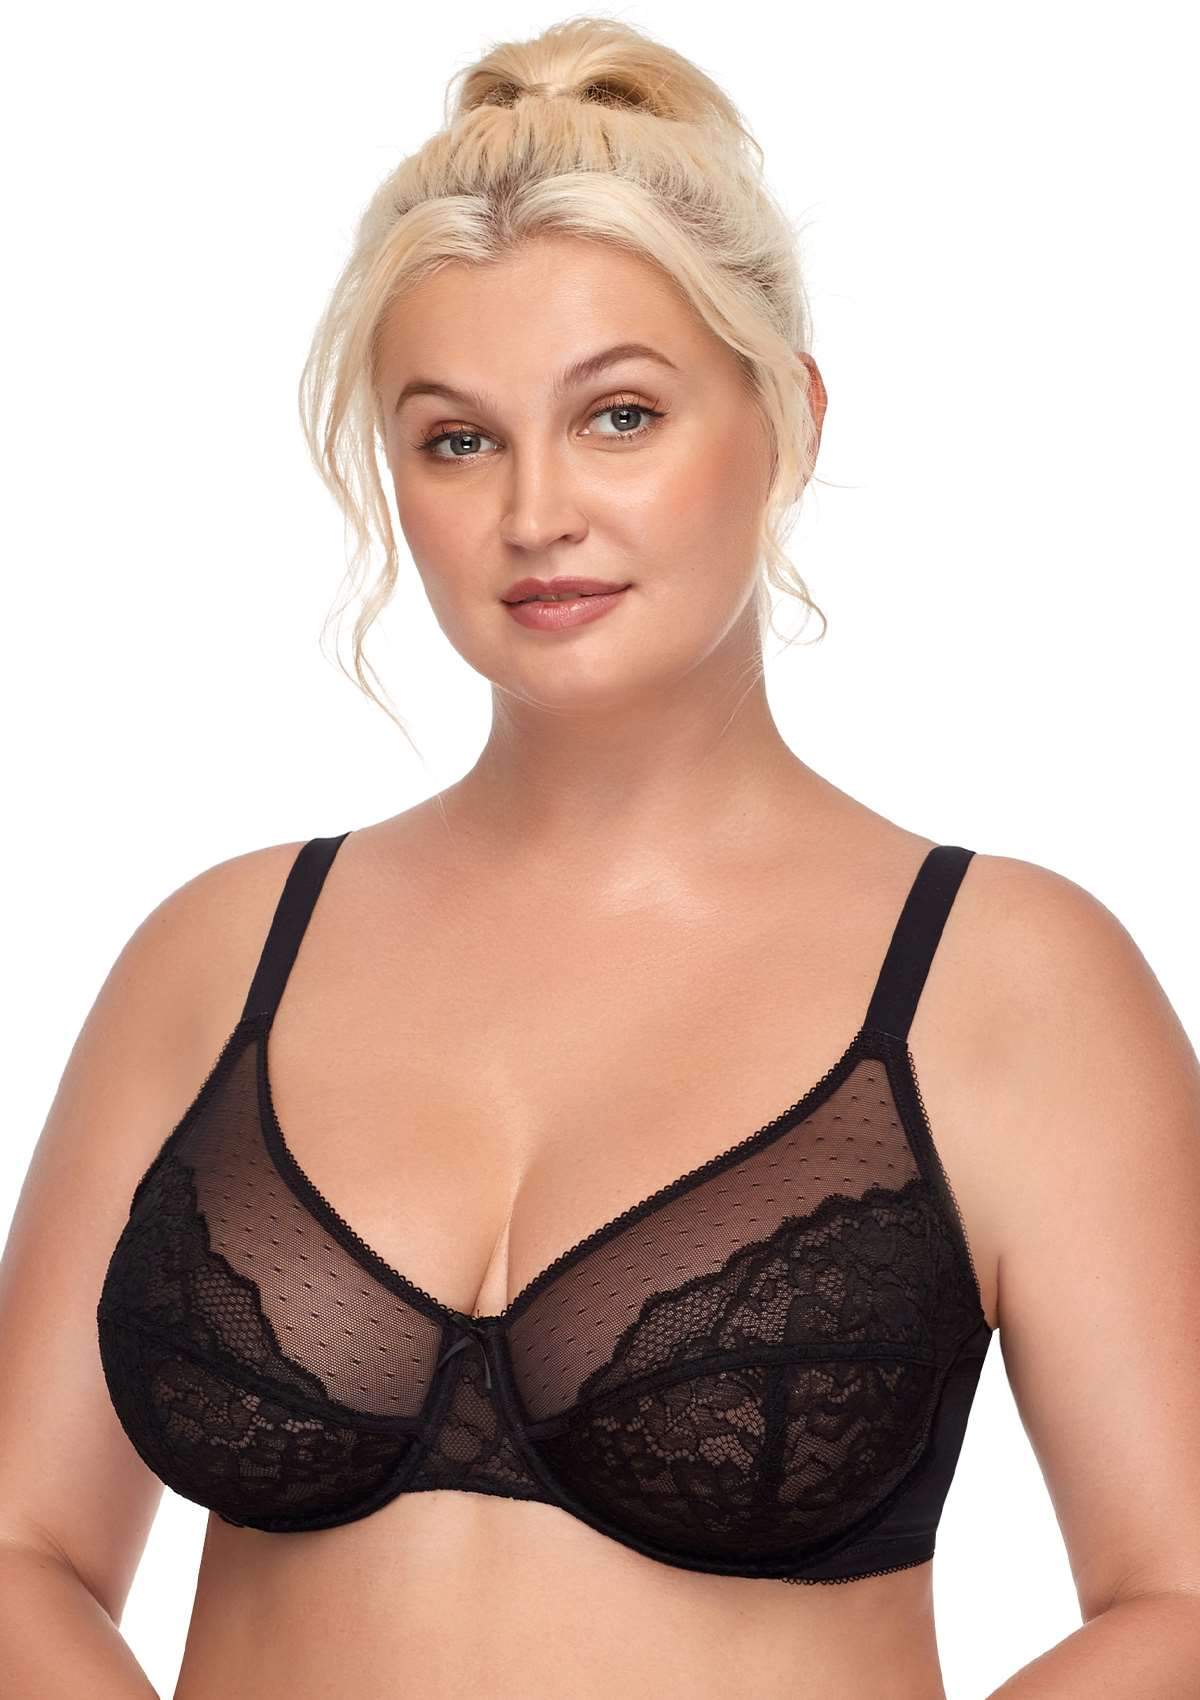 HSIA Enchante Lace Wire Bra For Lifting And Separating Large Breasts - Black / 34 / DD/E